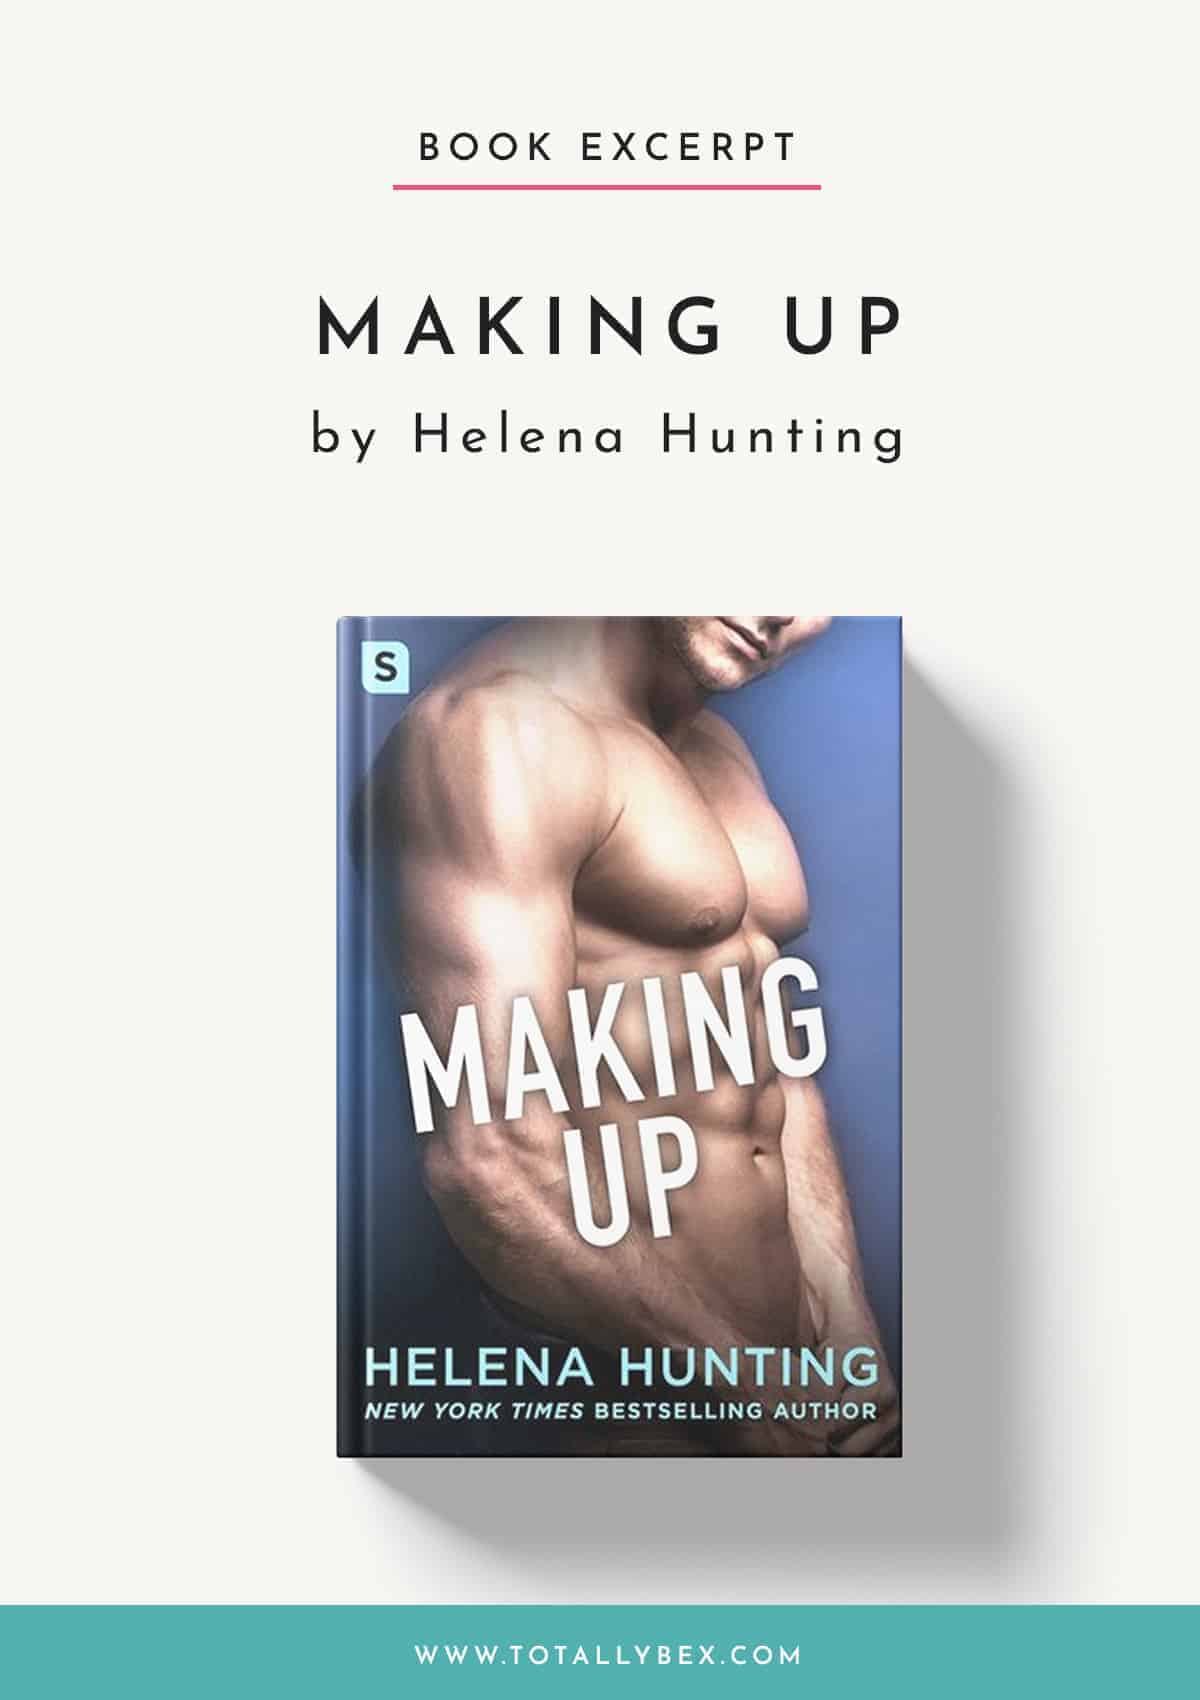 Making Up by Helena Hunting-Book Excerpt